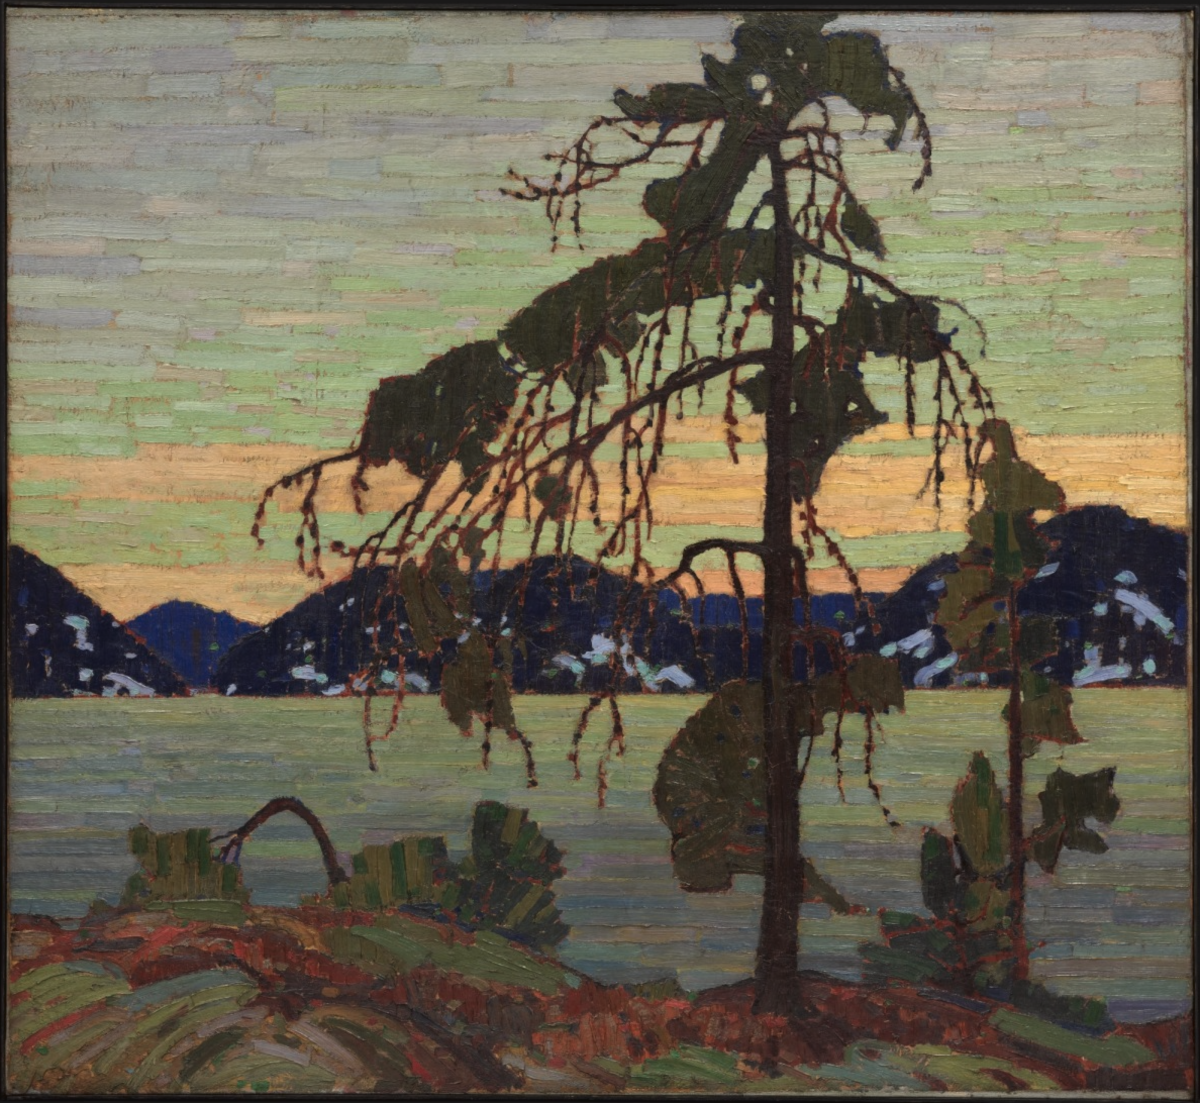 "The Jack Pine" by Tom Thomson